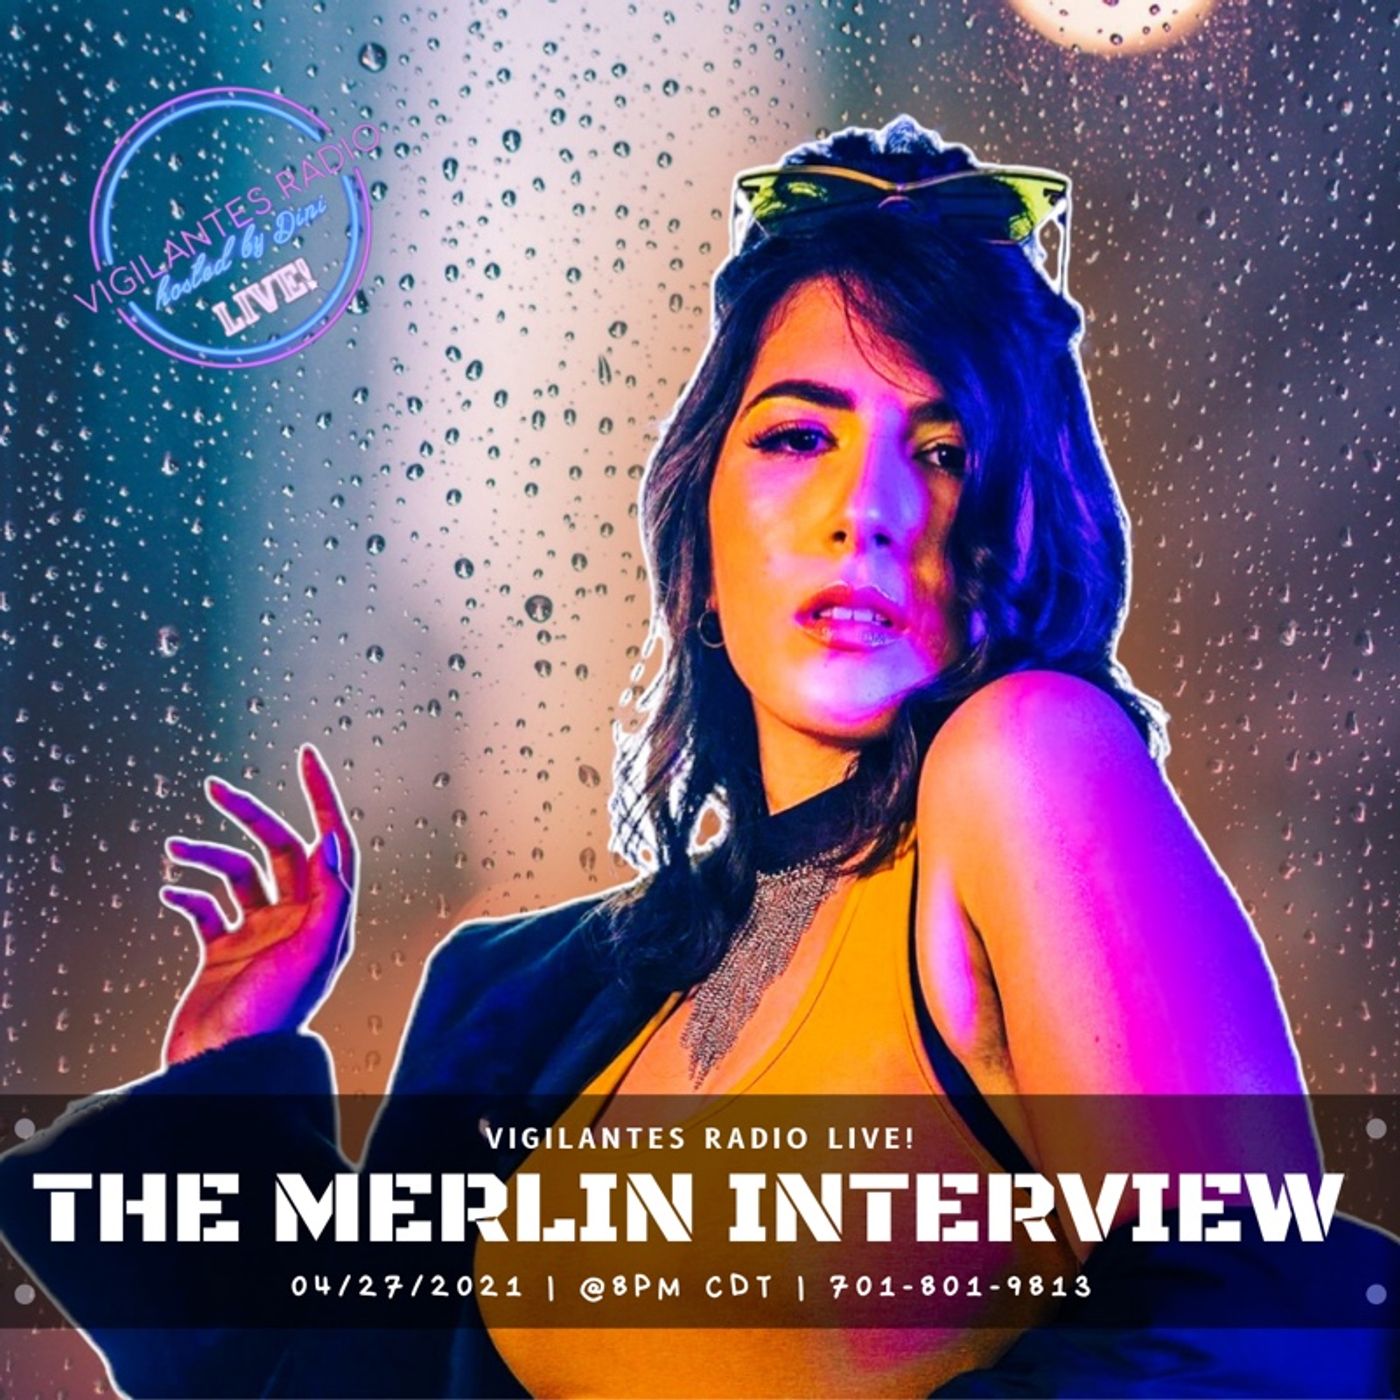 The MERLIN Interview. Image